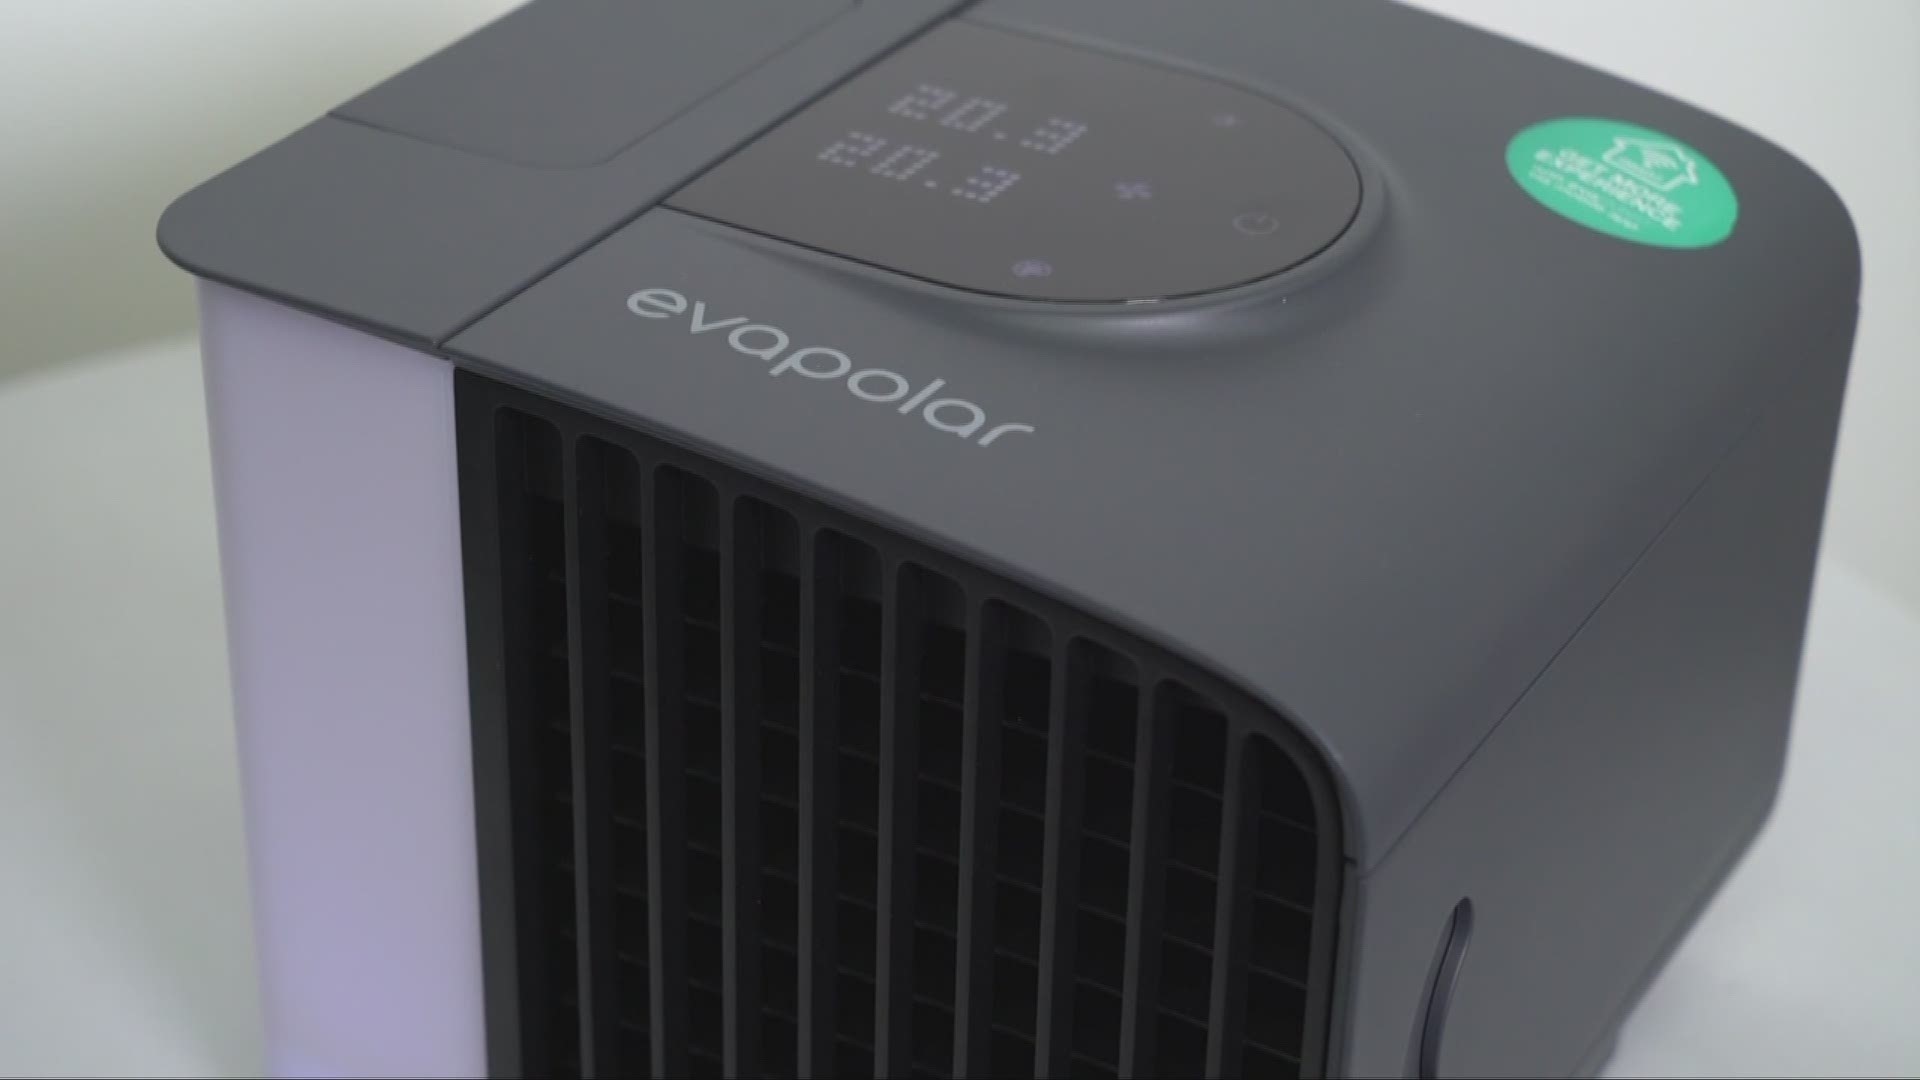 Deal Boss: Evapolar Filter, Humidifier, and Air Conditioner All In One